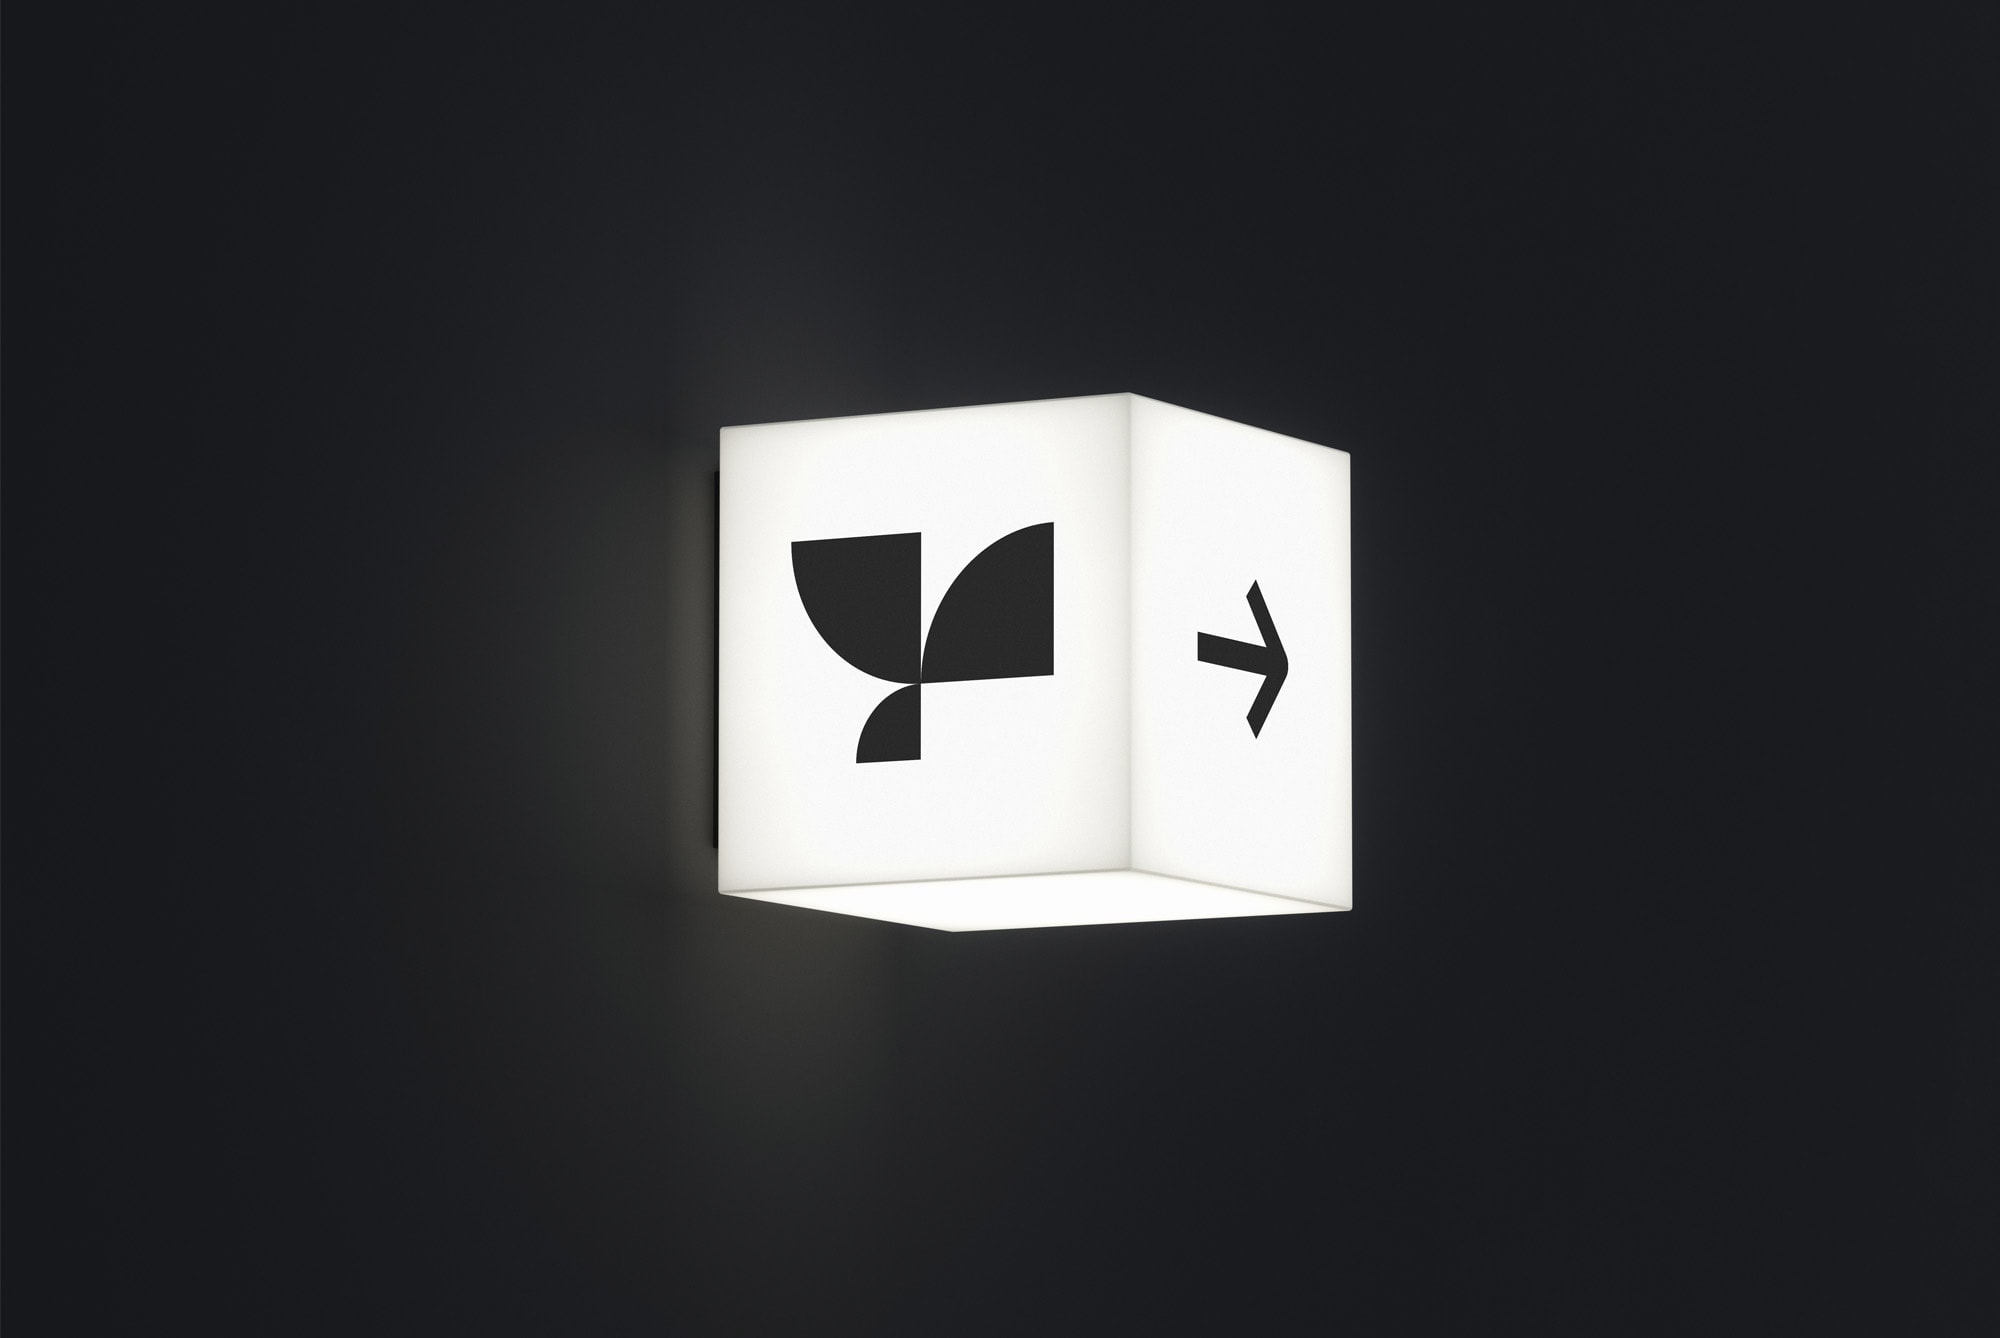 Minimalist cube logo mockup with contrast lighting on a dark background, ideal for brand presentation and design showcases.